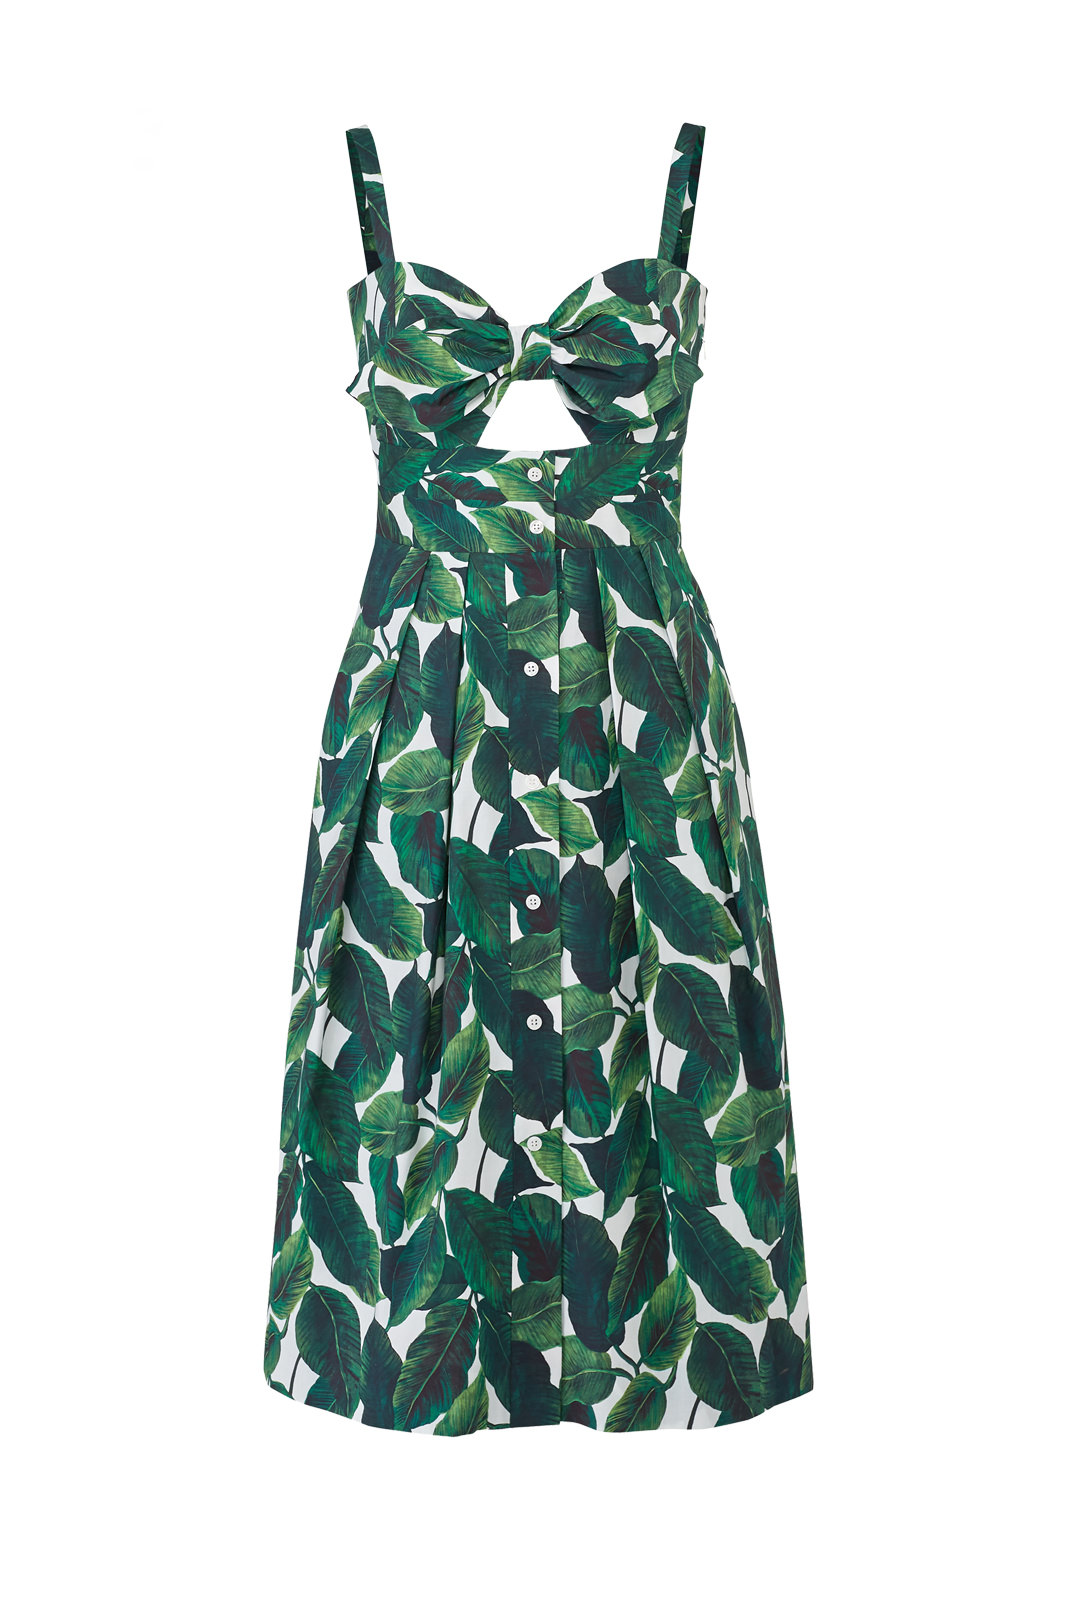 Milly Jordan Banana Leaf Dress Milly Banana Leaf Dress from Rent the Runway featured by top US fashion blog, The Borrowed Babes - Banana Leaf Trend